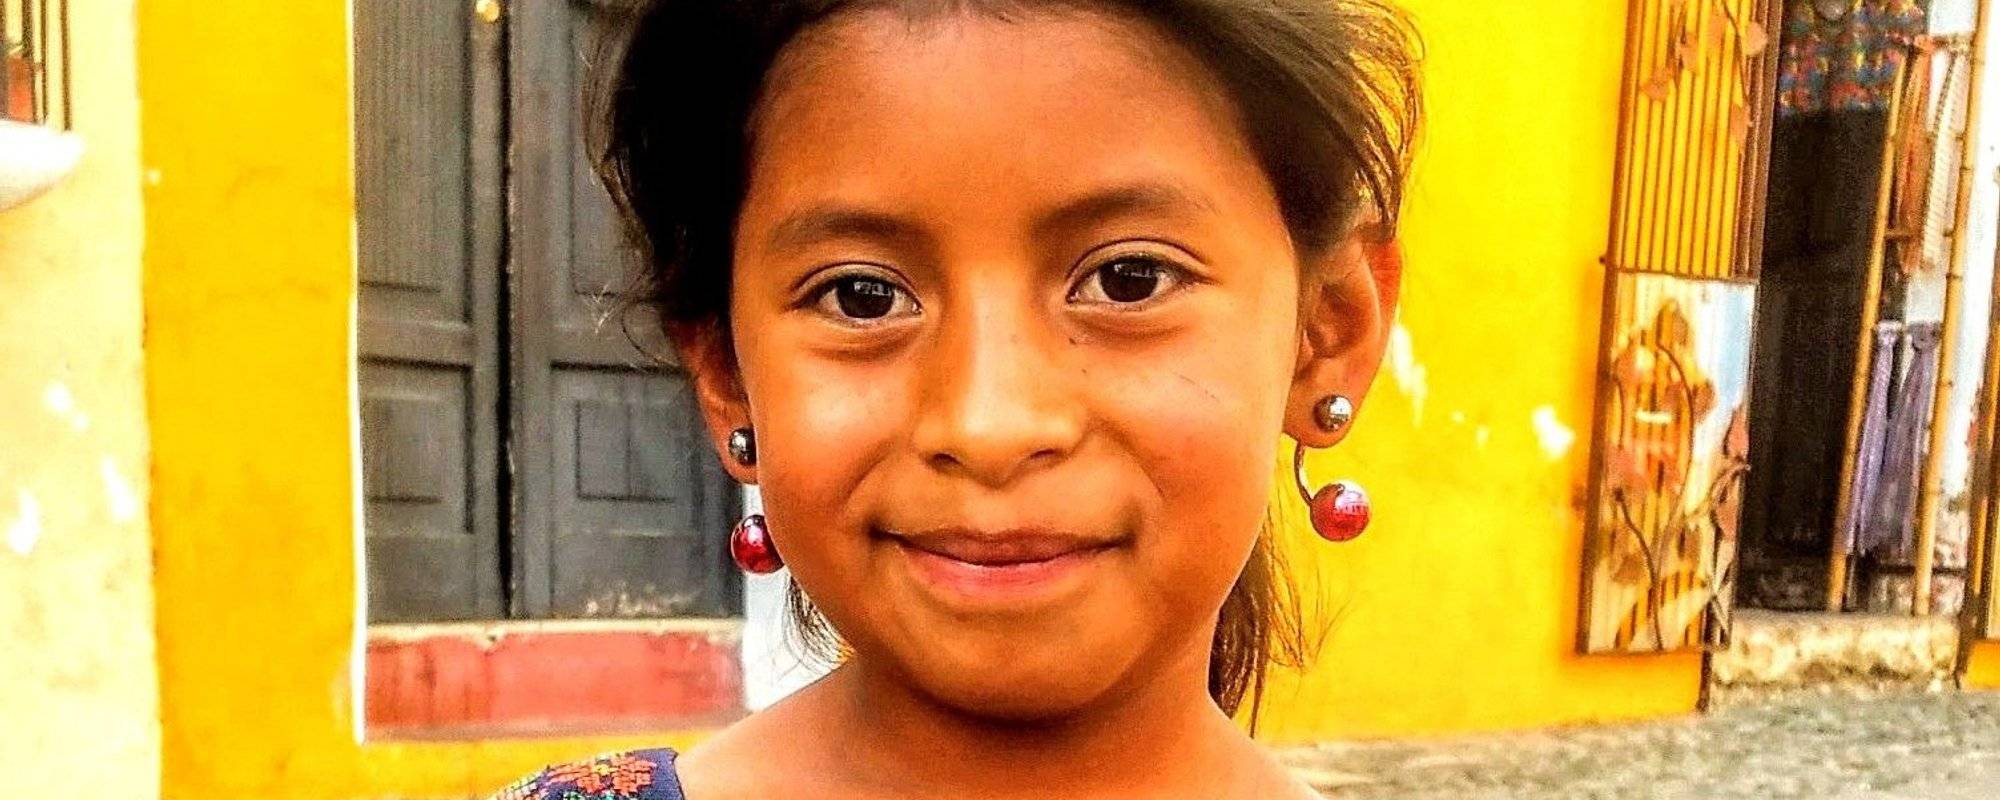 Mayan Girl in Antigua, Guatemala.  Best Salesperson on the Planet. And, other Colorchallenge Wednesday Yellow Photos